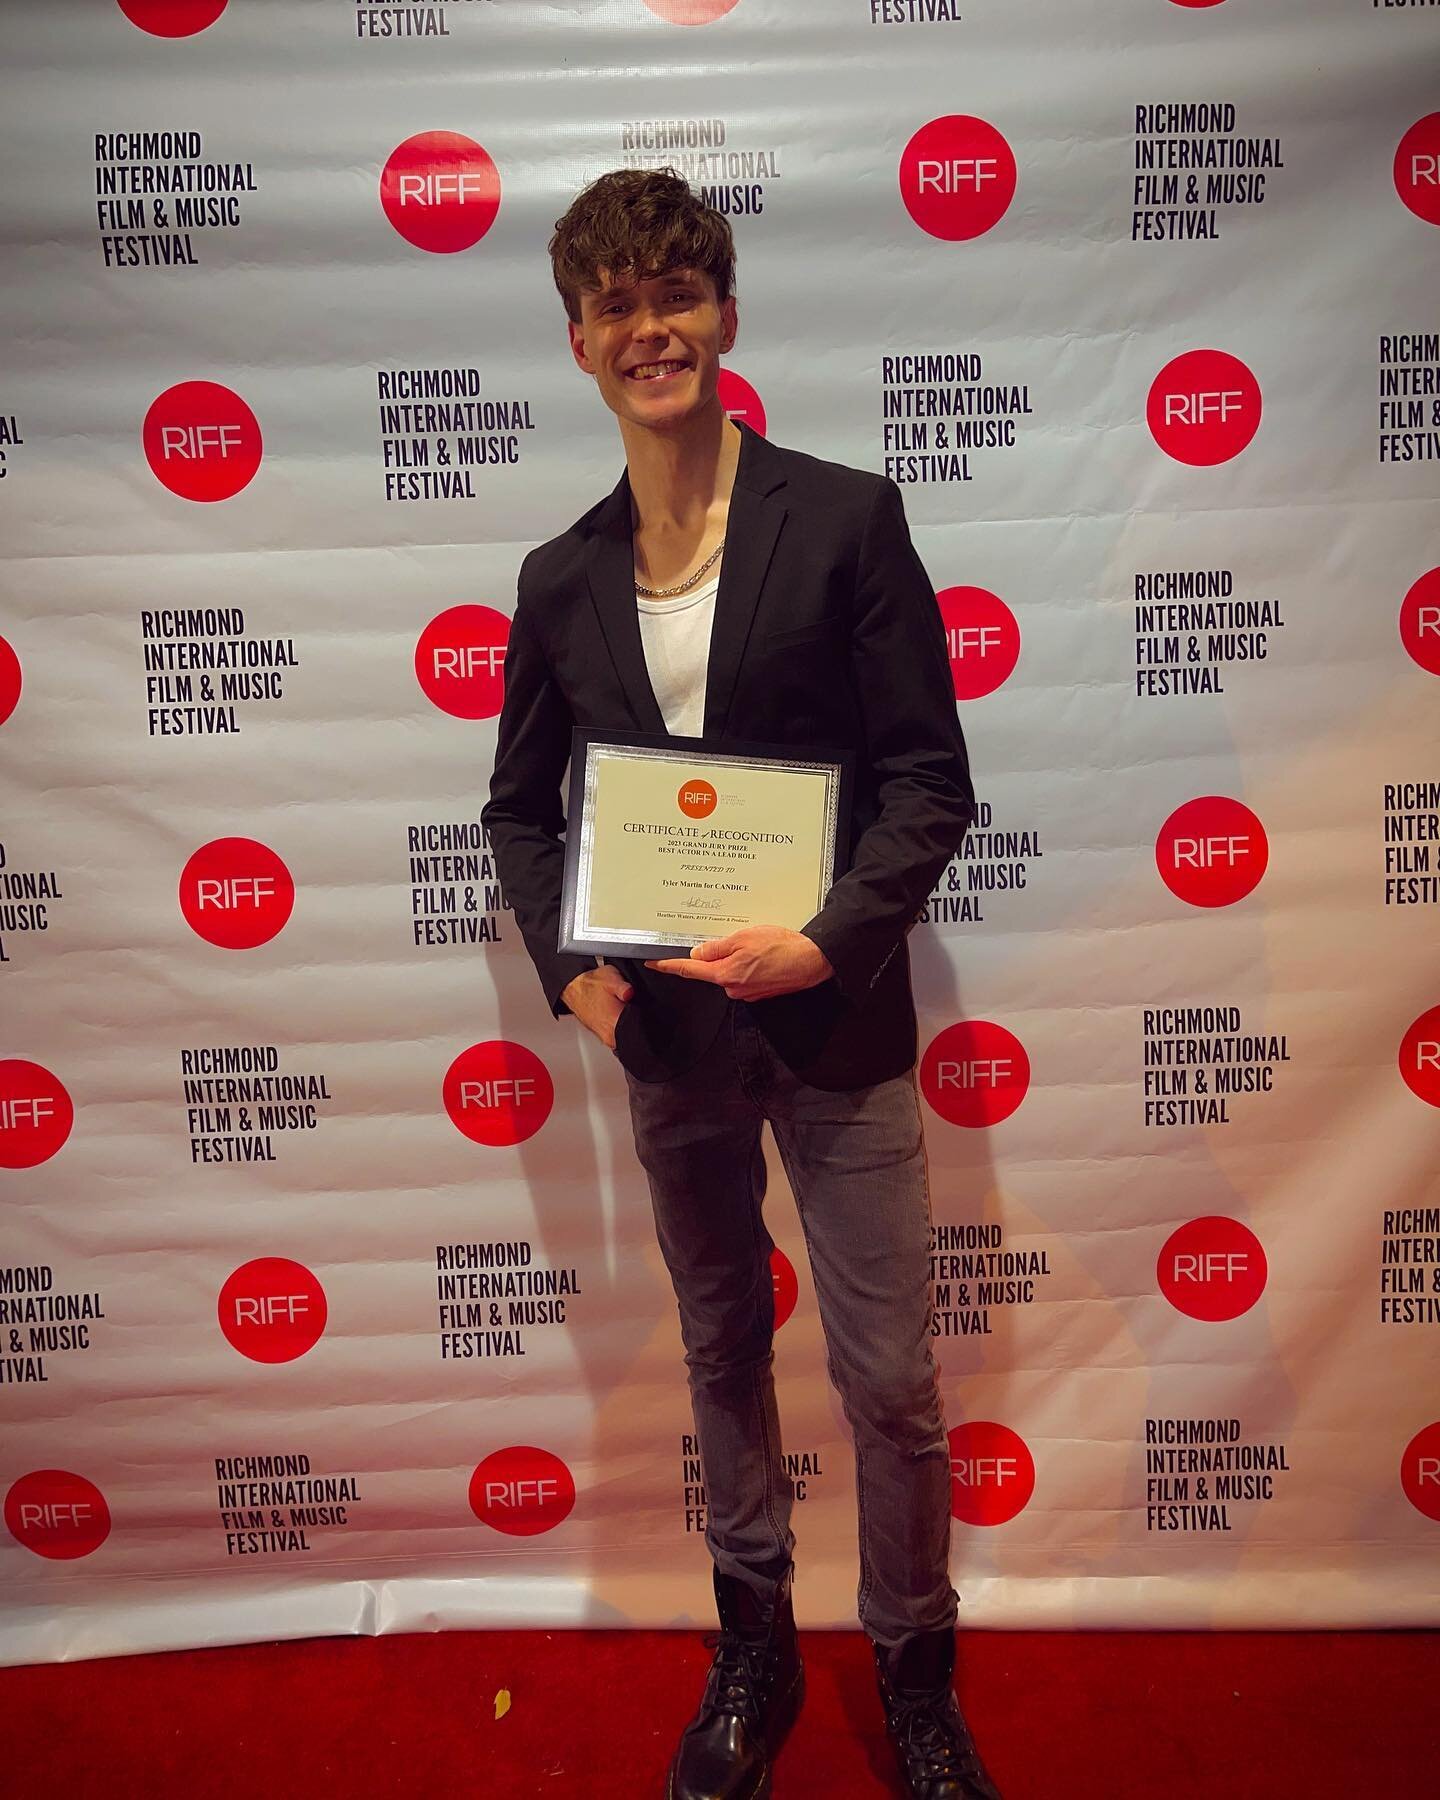 I won Best Actor for &ldquo;Candice&rdquo; @riffrva ✨ A heartfelt thank you to the entire RIFF team for this incredible recognition and for crafting an unforgettable weekend. Presenting &quot;Candice&quot; was an absolute joy, and it was wonderful to